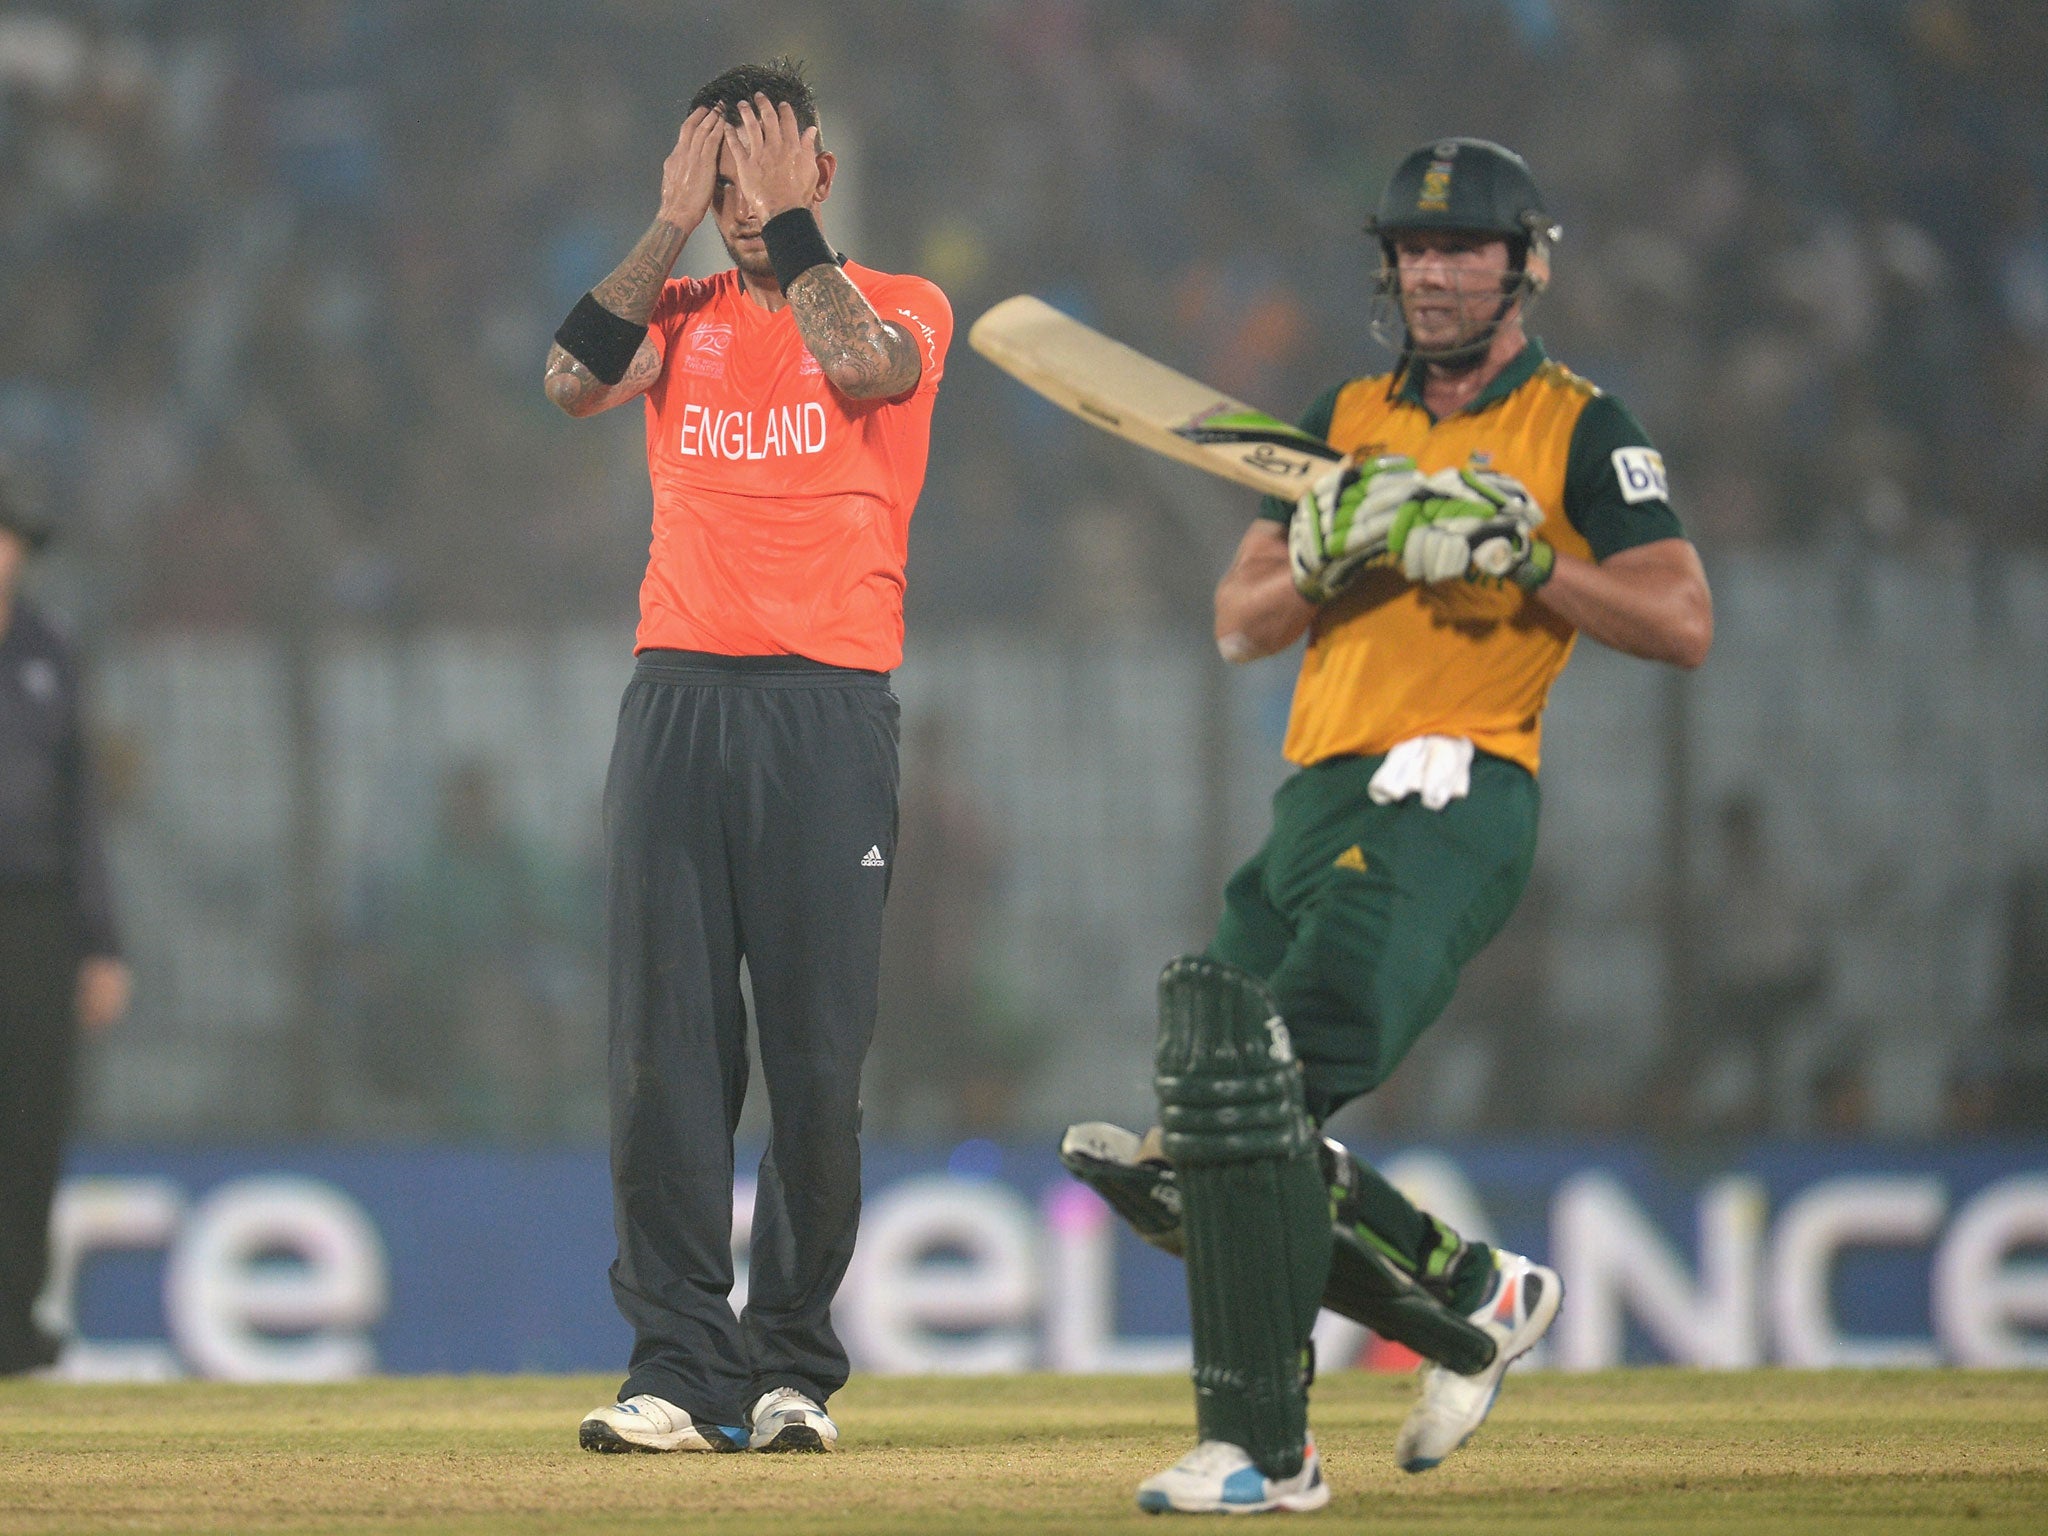 Jade Dernbach, of England, reacts after bowling to South Africa’s A B de Villiers during Saturday’s disastrous spell